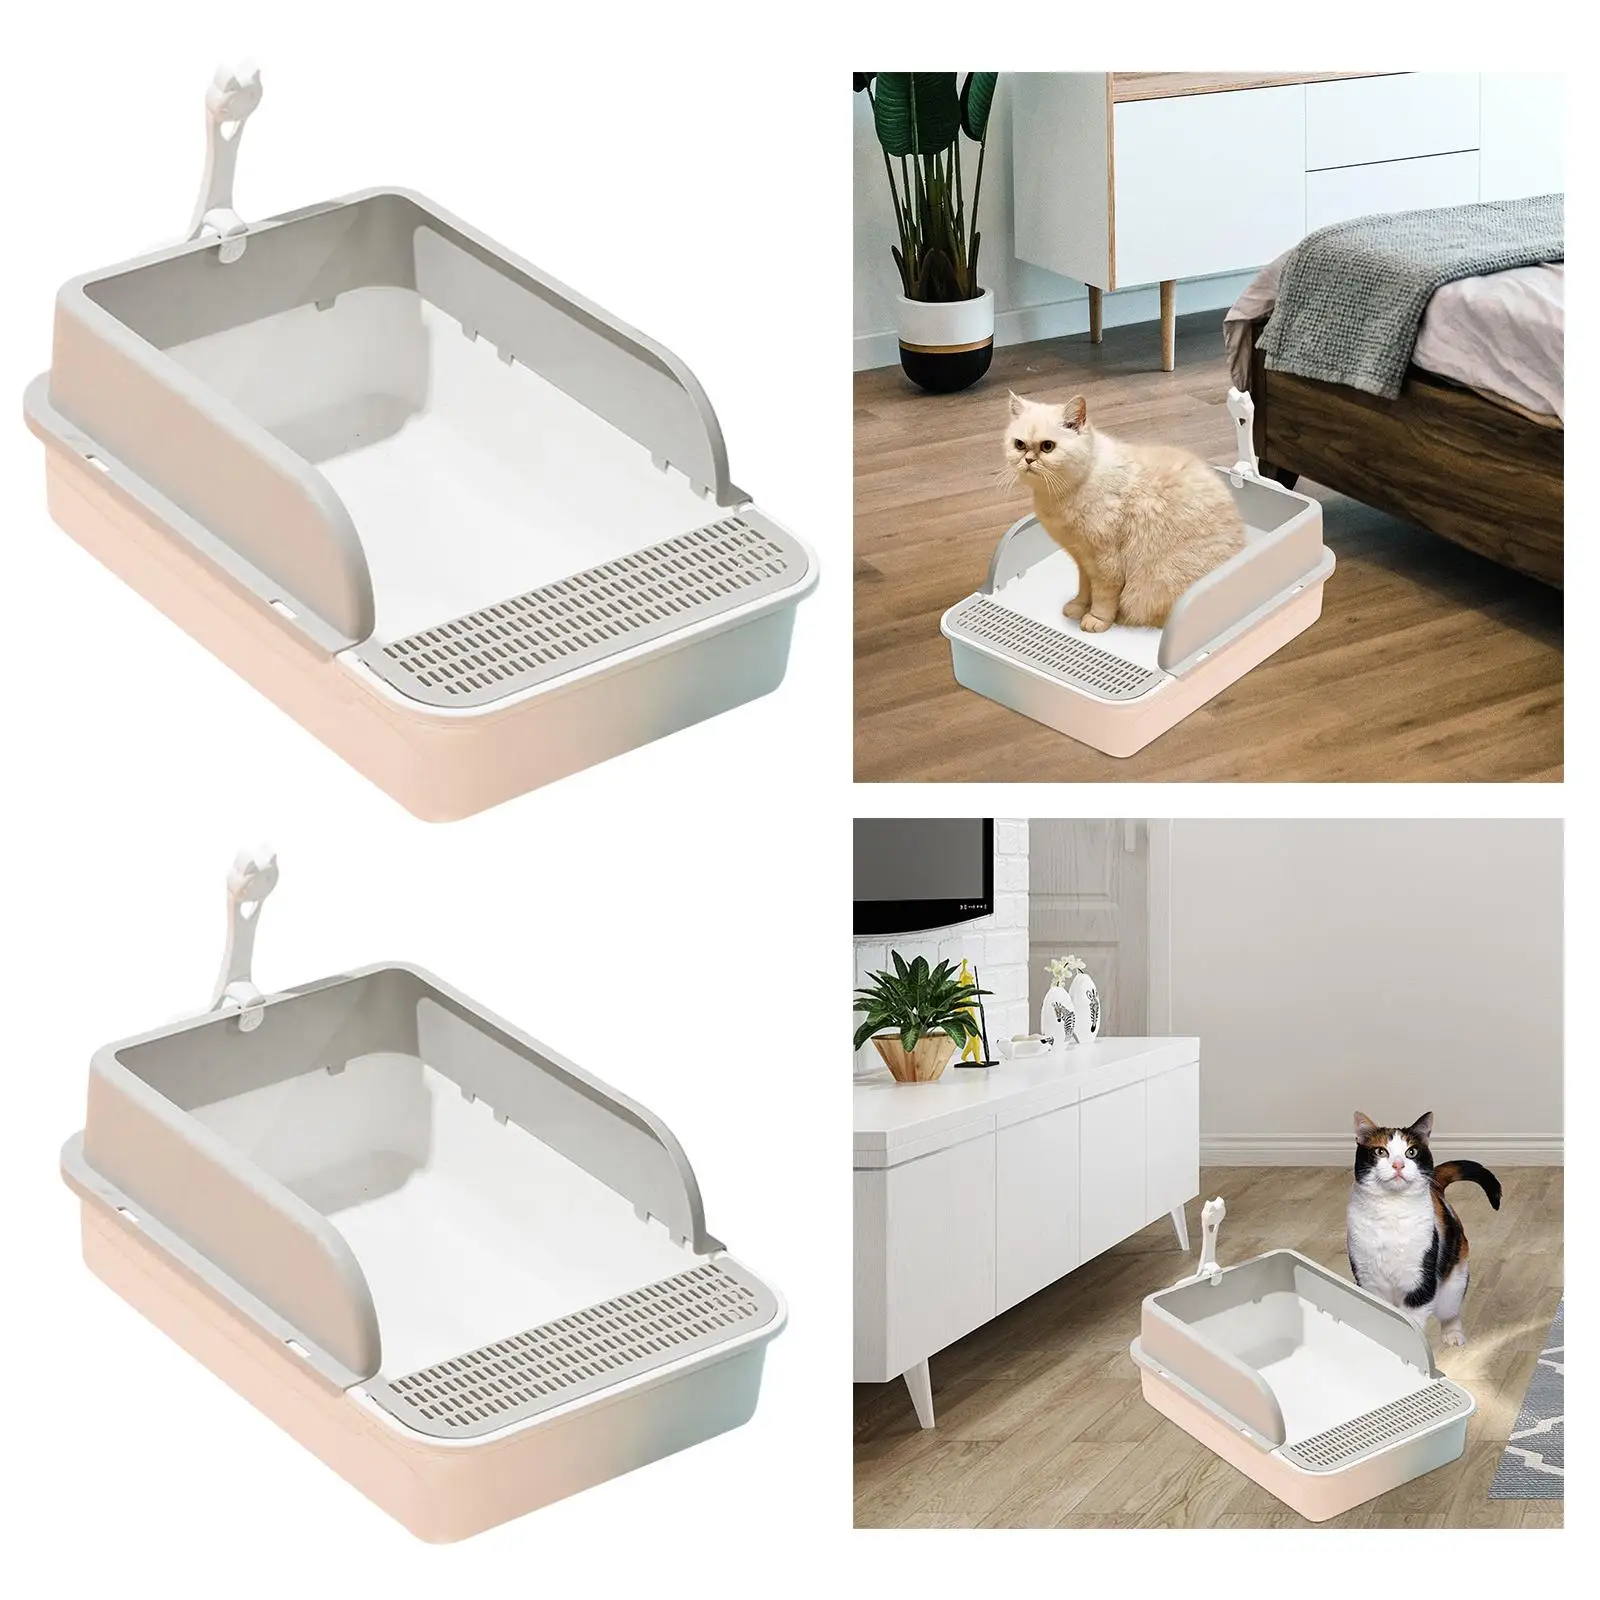 Open Air Litter Box Deep Loo Easy to Clean Bedpan Kitten Litter Tray Sturdy with High Side Pet Litter Tray for Bunny Kitten